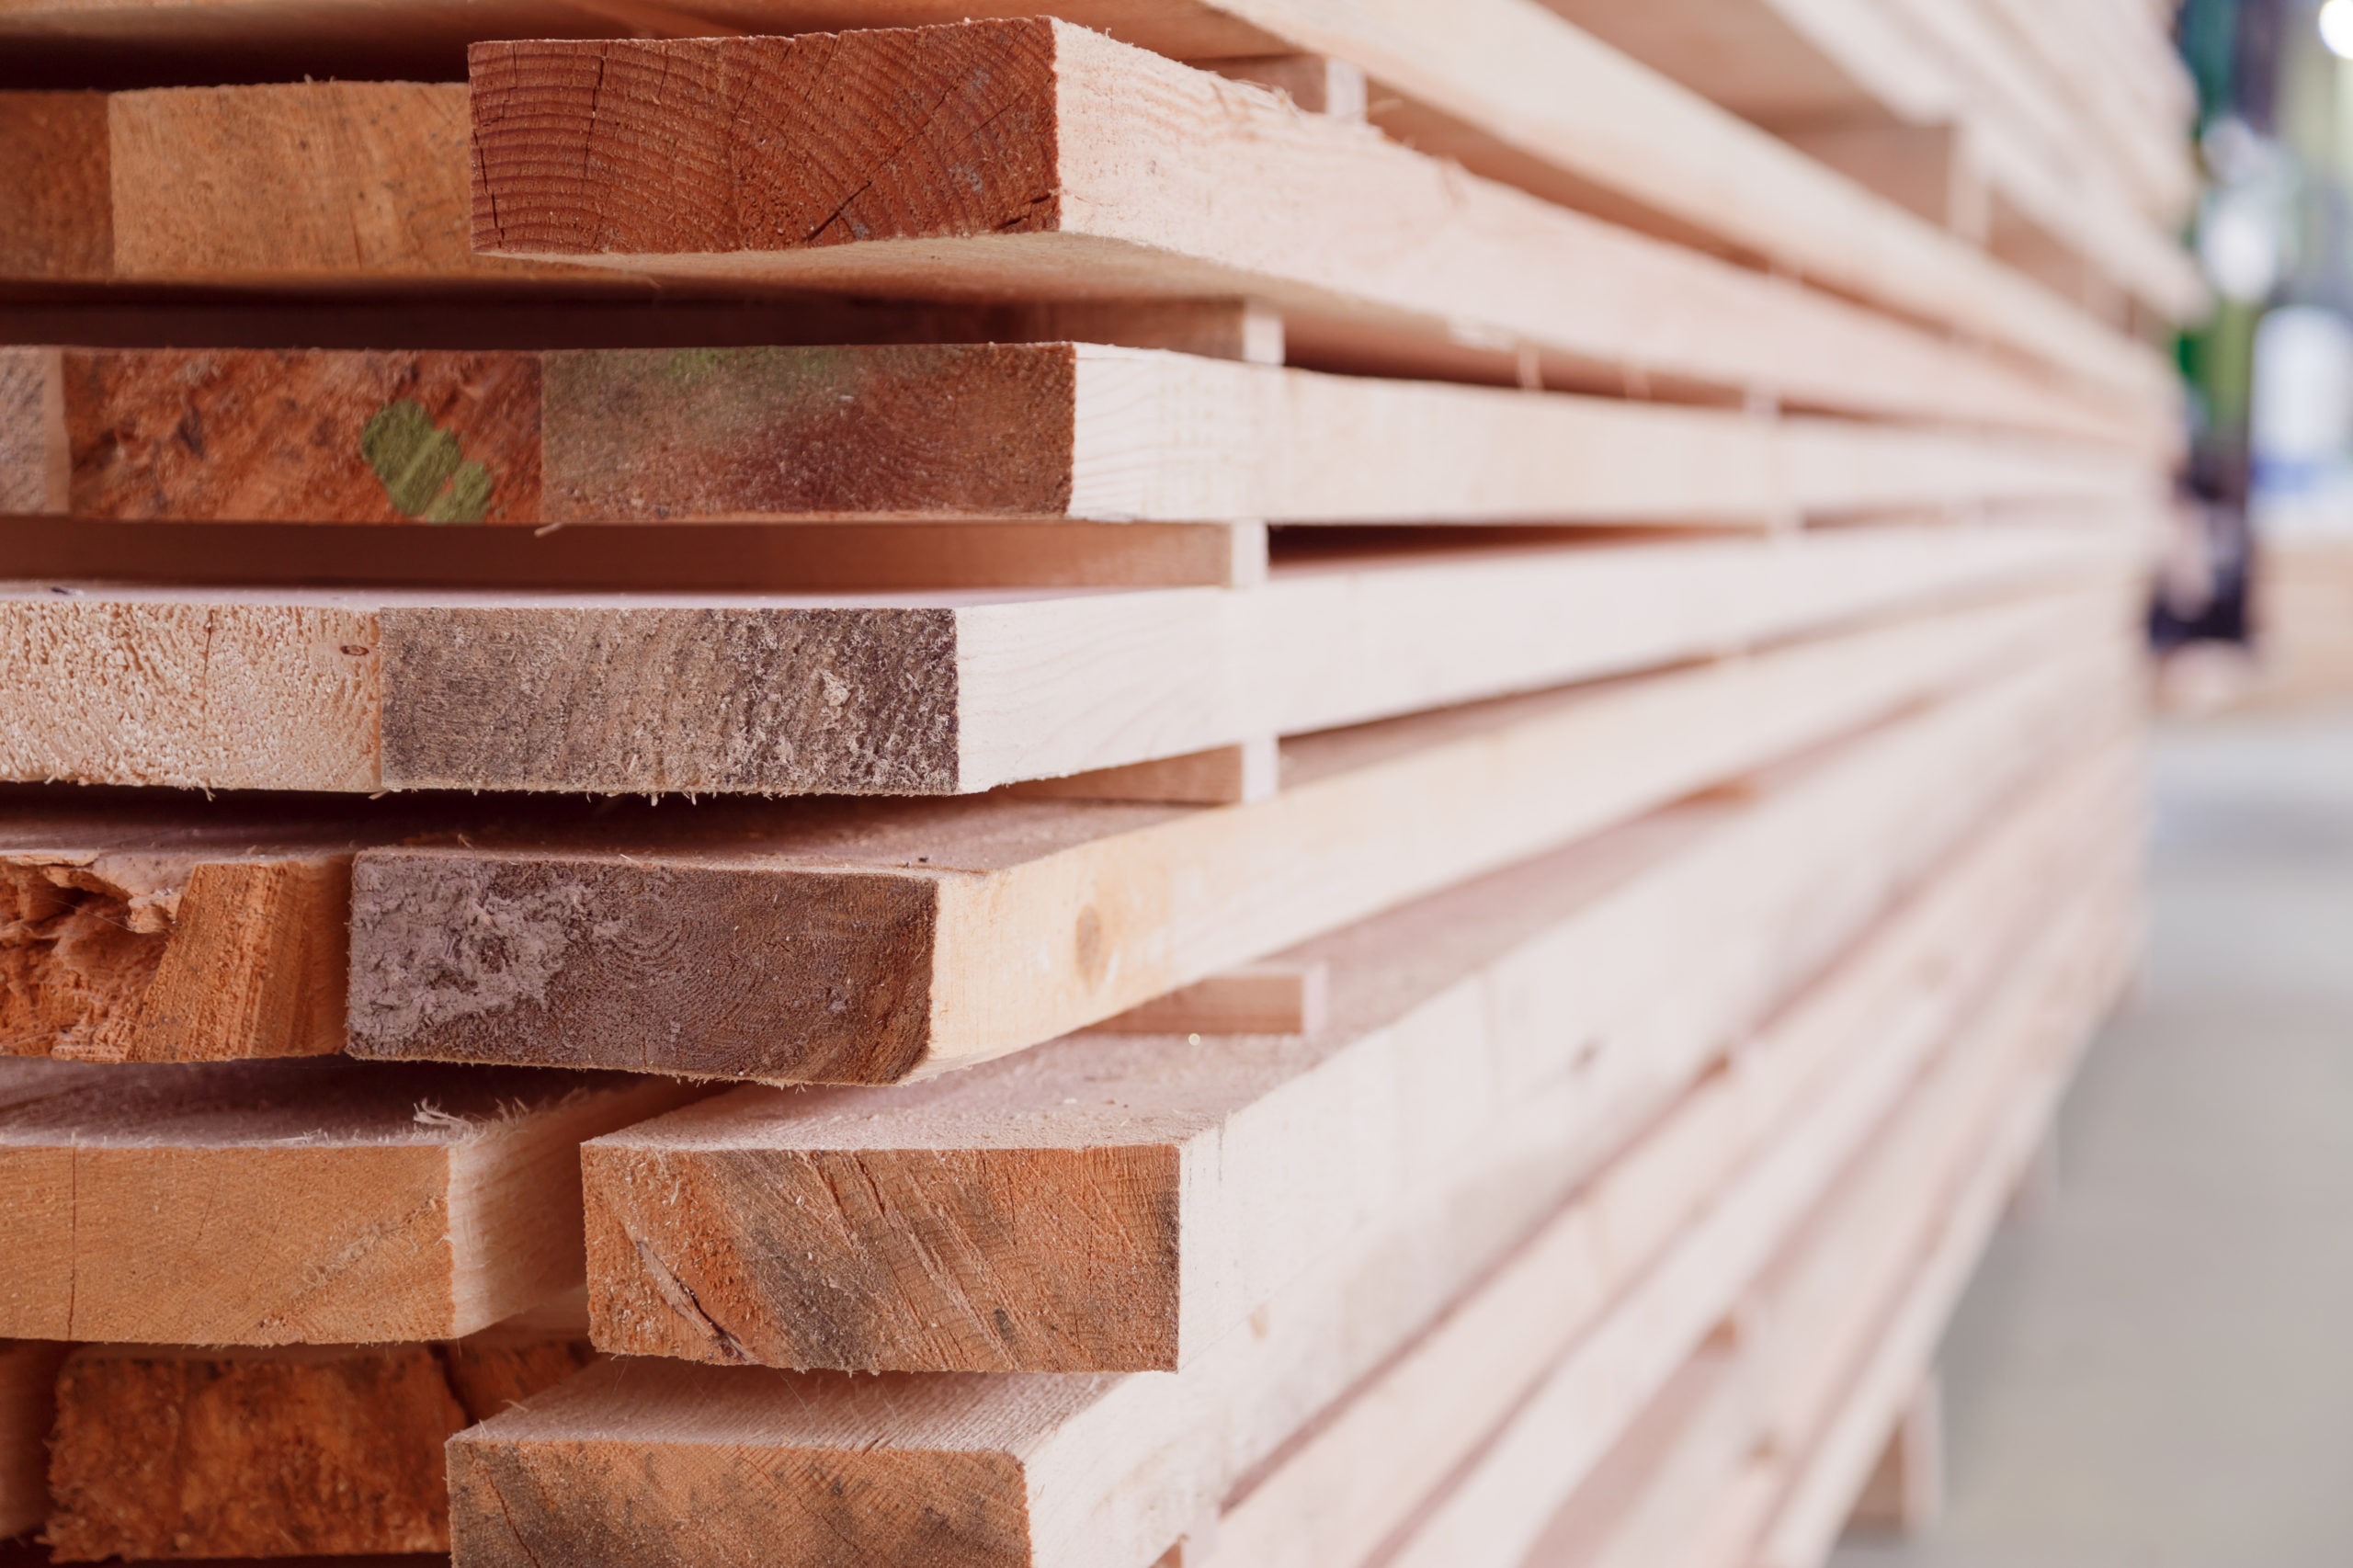 Hardwood Lumber Near Me 5 Simple Tricks To The Best Deal